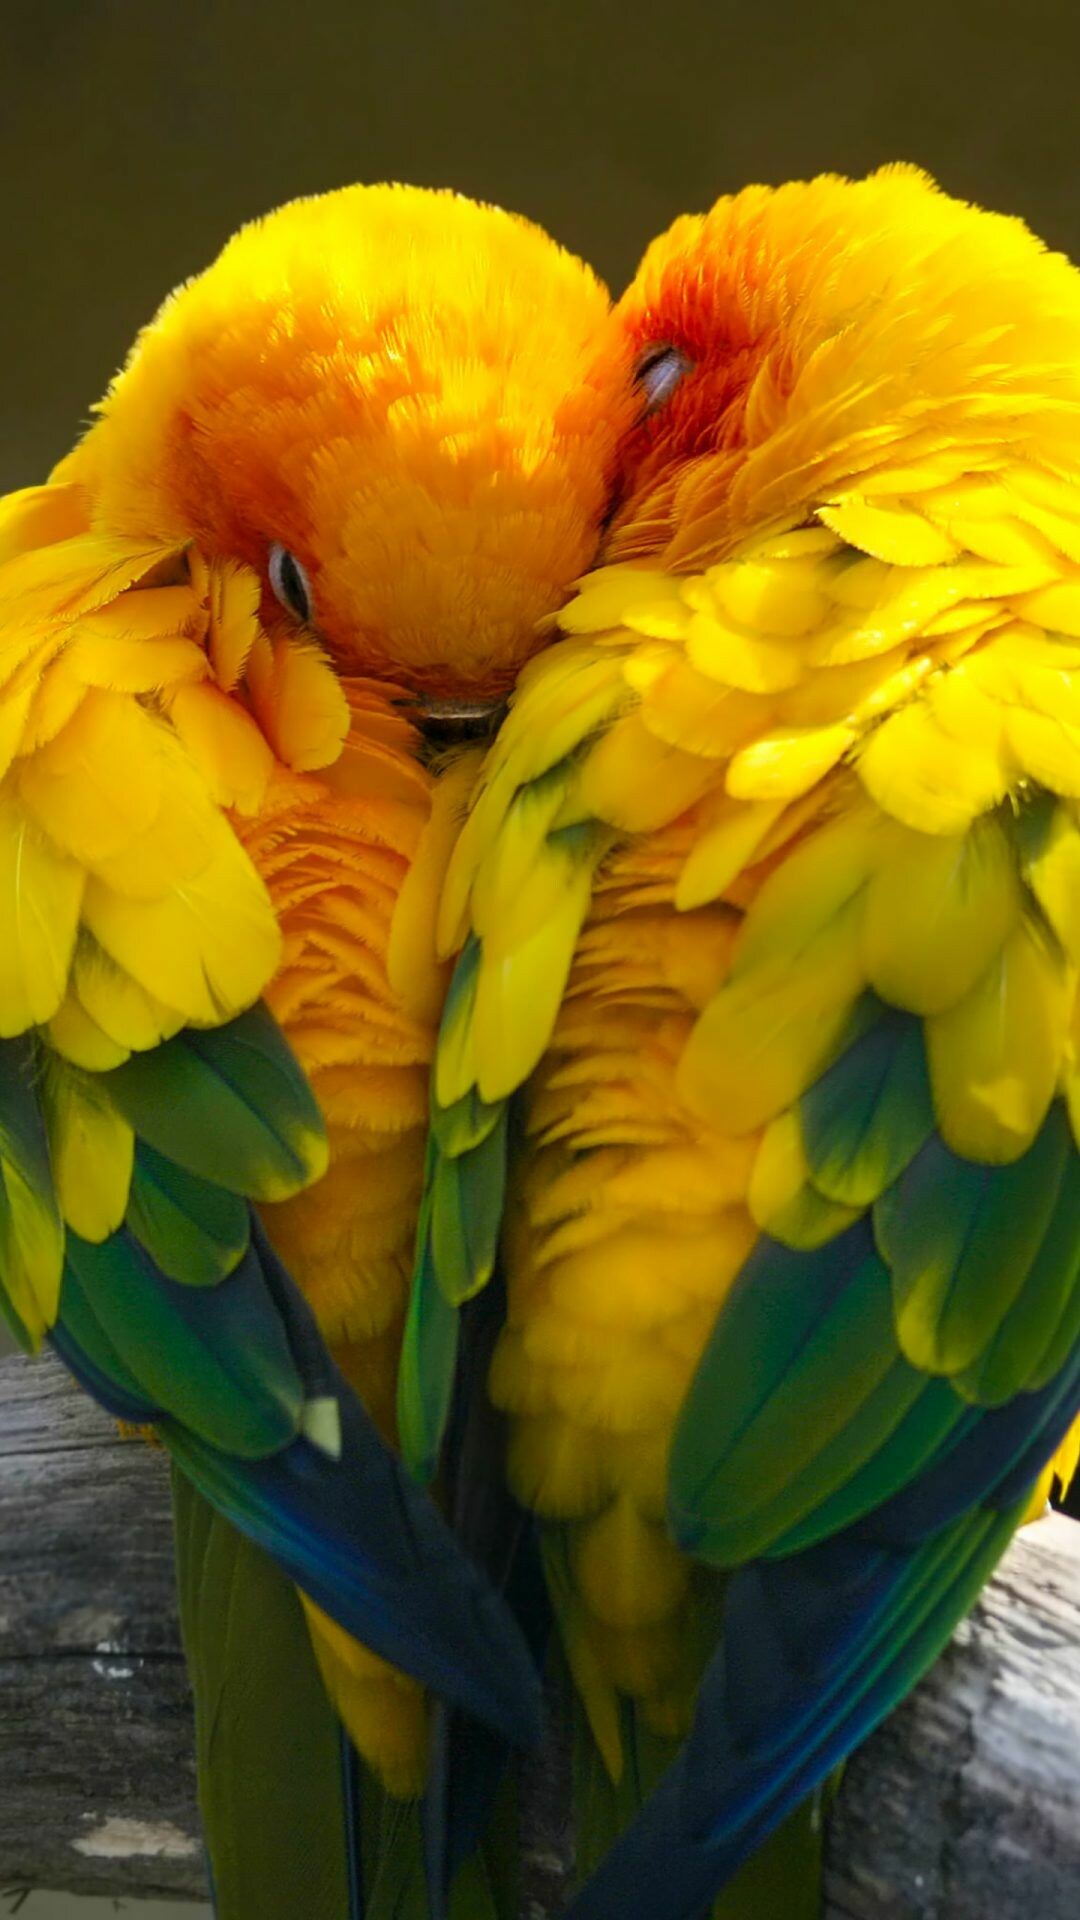 Bird: Sun parakeet, Known in aviculture as the sun conure, A medium-sized, vibrantly colored parrot. 1080x1920 Full HD Wallpaper.